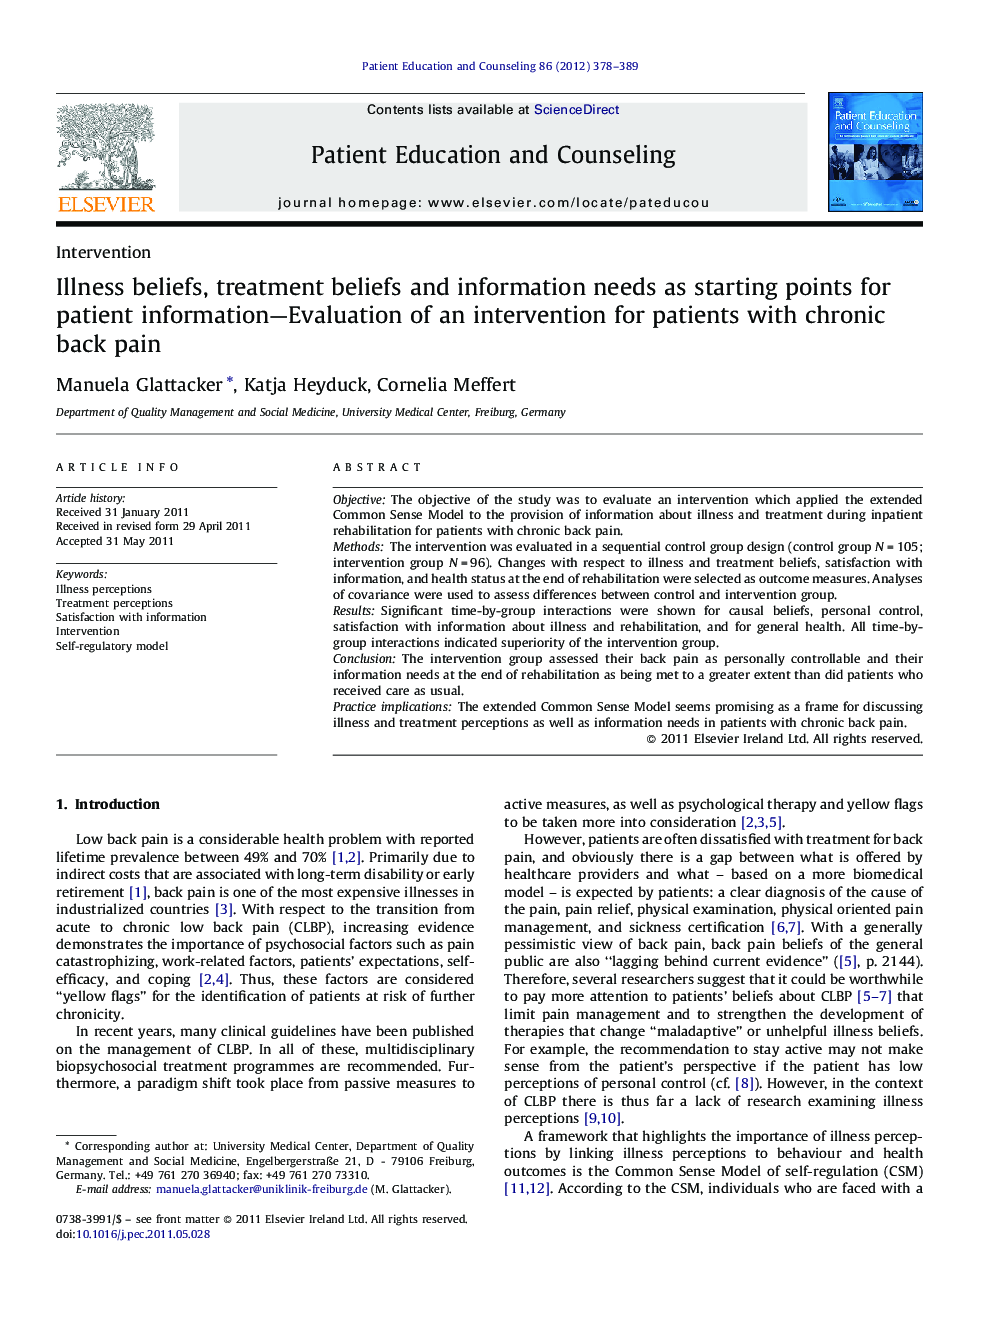 Illness beliefs, treatment beliefs and information needs as starting points for patient information—Evaluation of an intervention for patients with chronic back pain